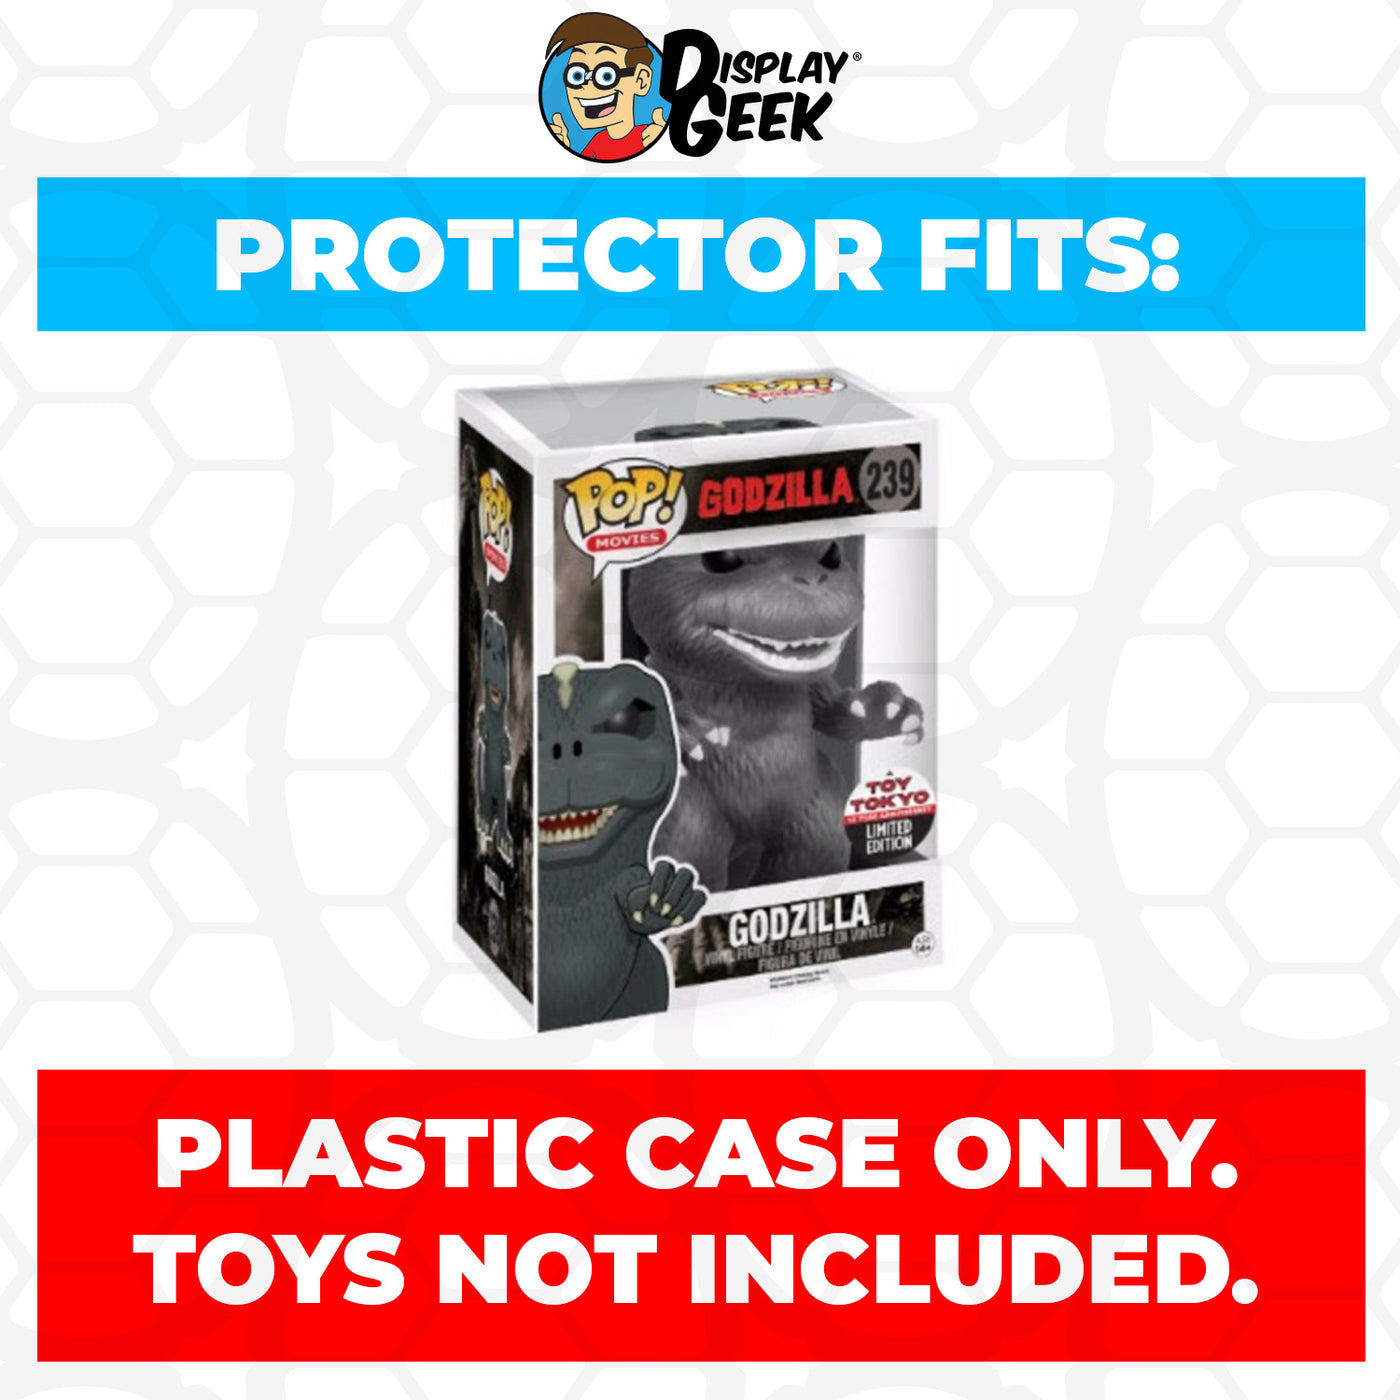 Pop Protector for 6 inch Godzilla Black & White NYCC #239 Super Funko Pop on The Protector Guide App by Display Geek